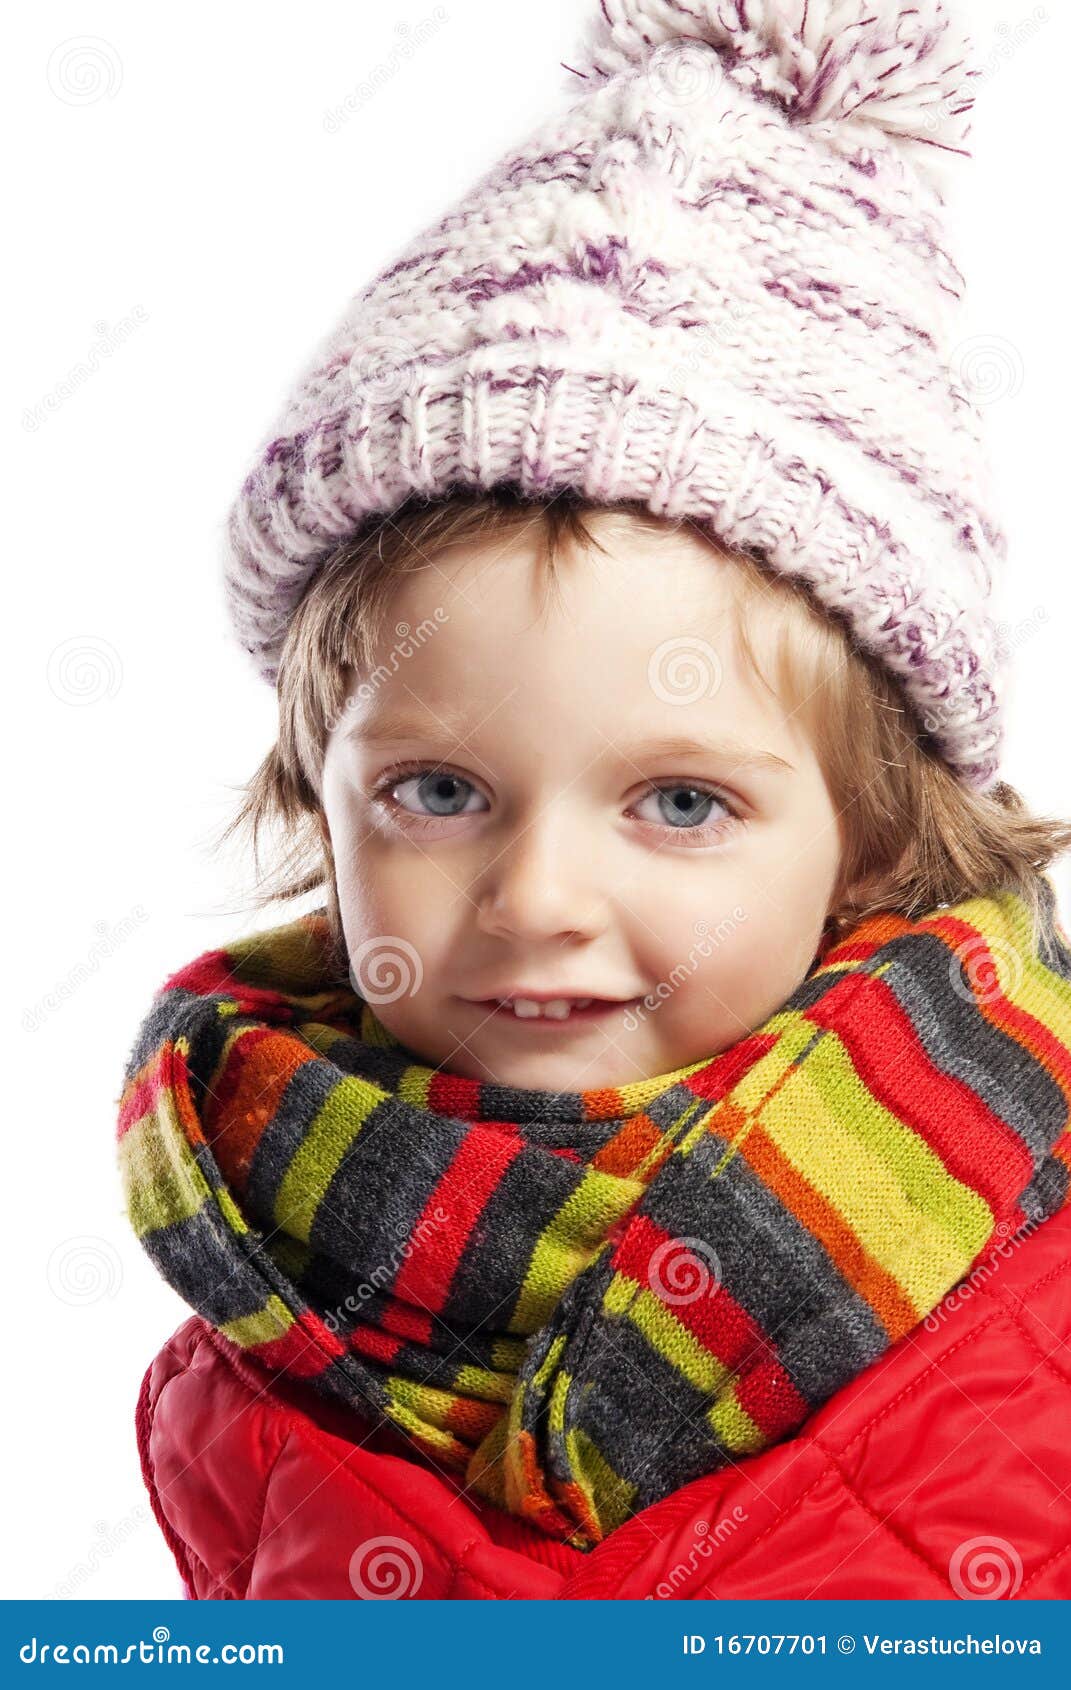 Little Girl Three with Winter Clothes Stock Image - Image of baby, cute ...